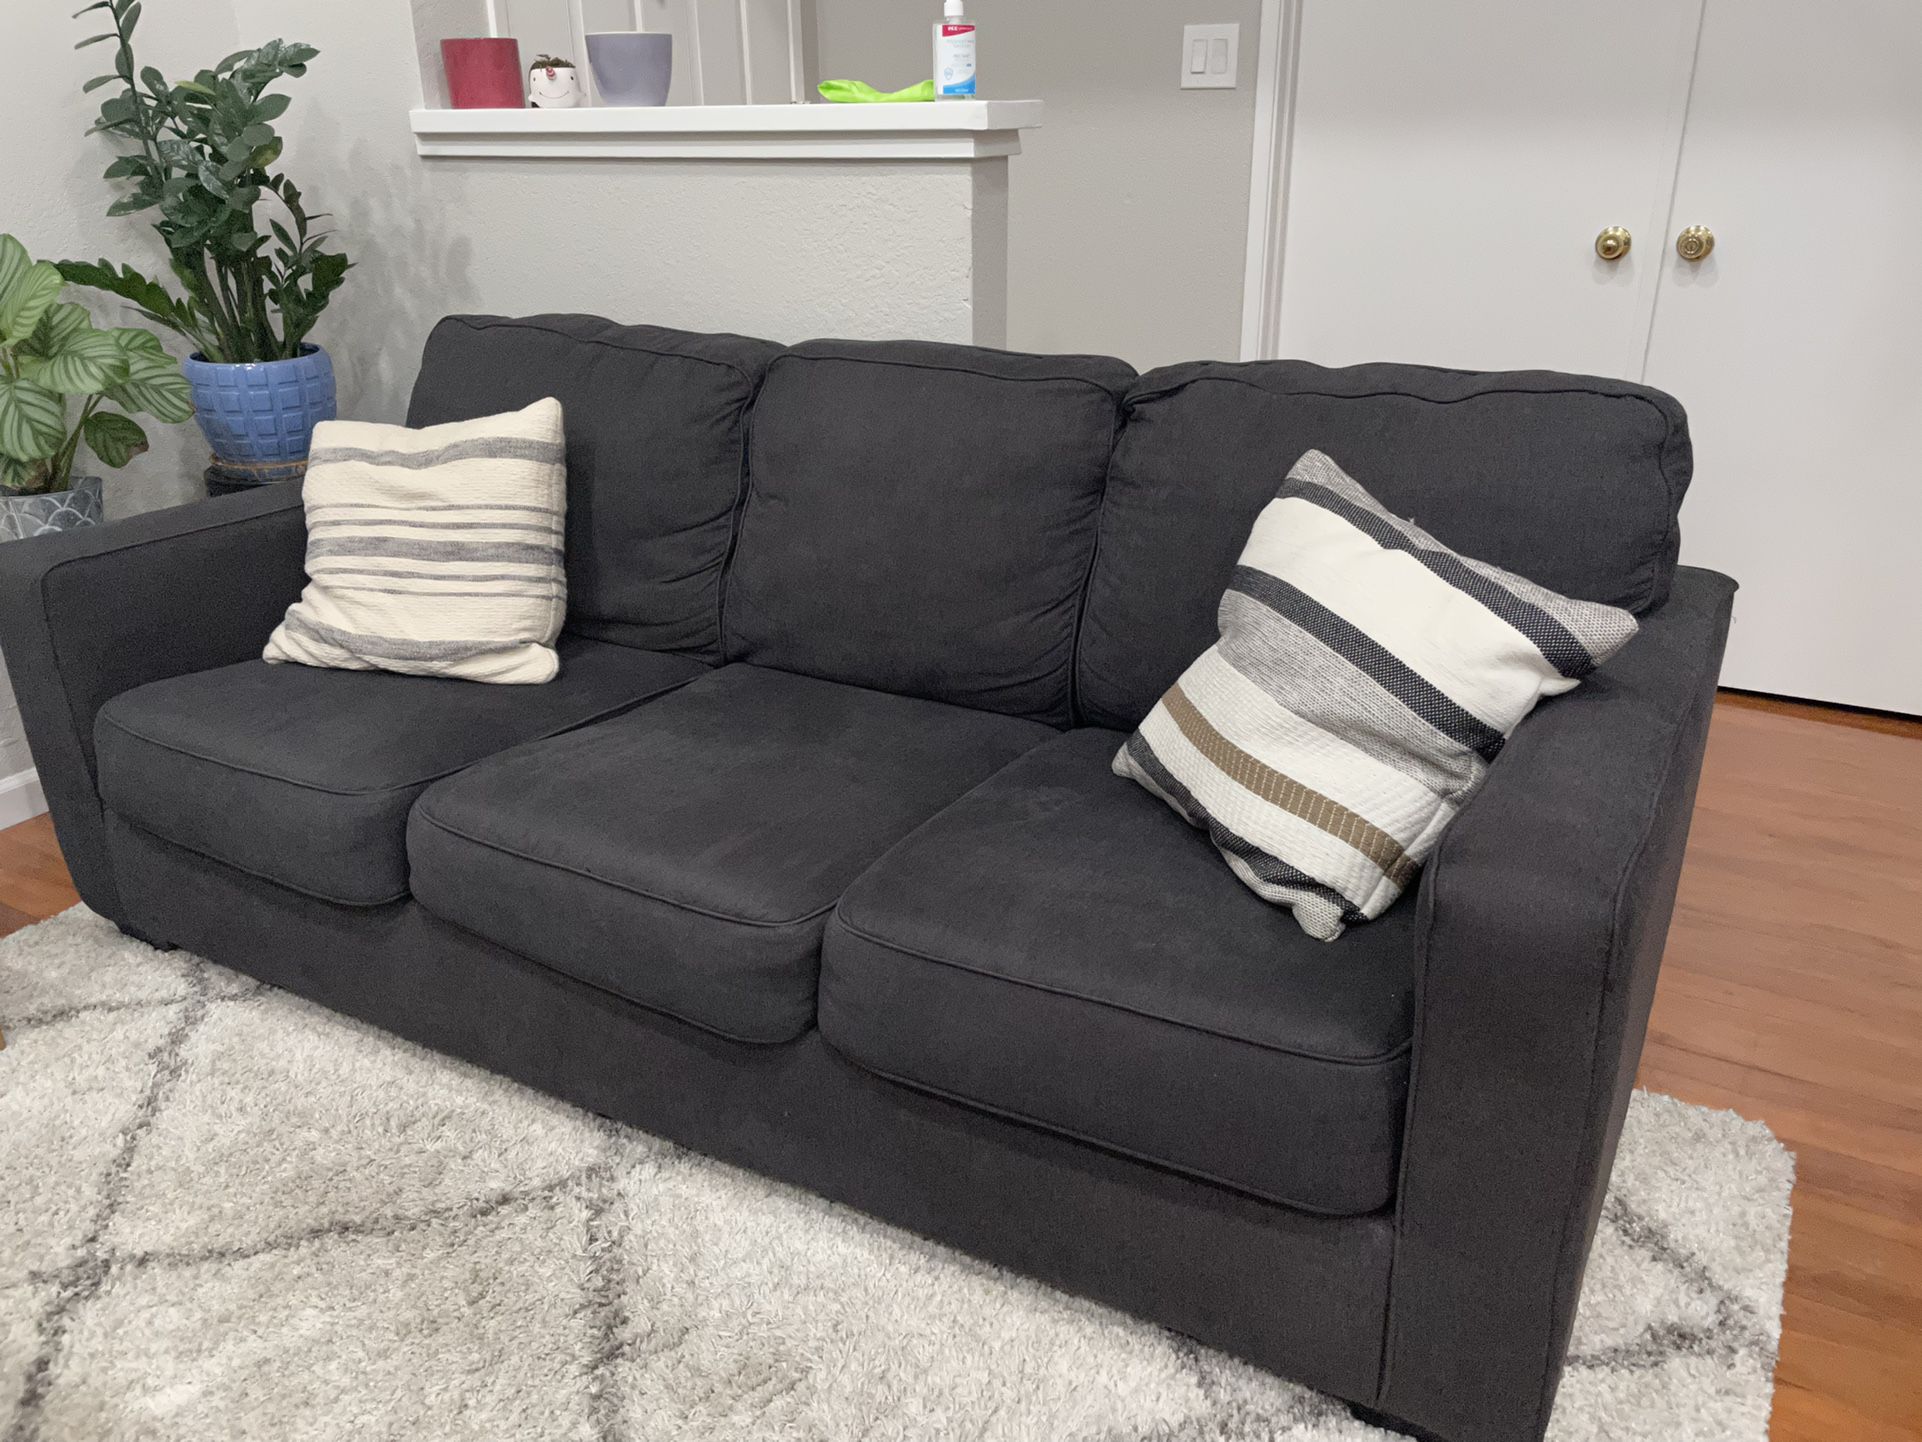 Used Grey Couch